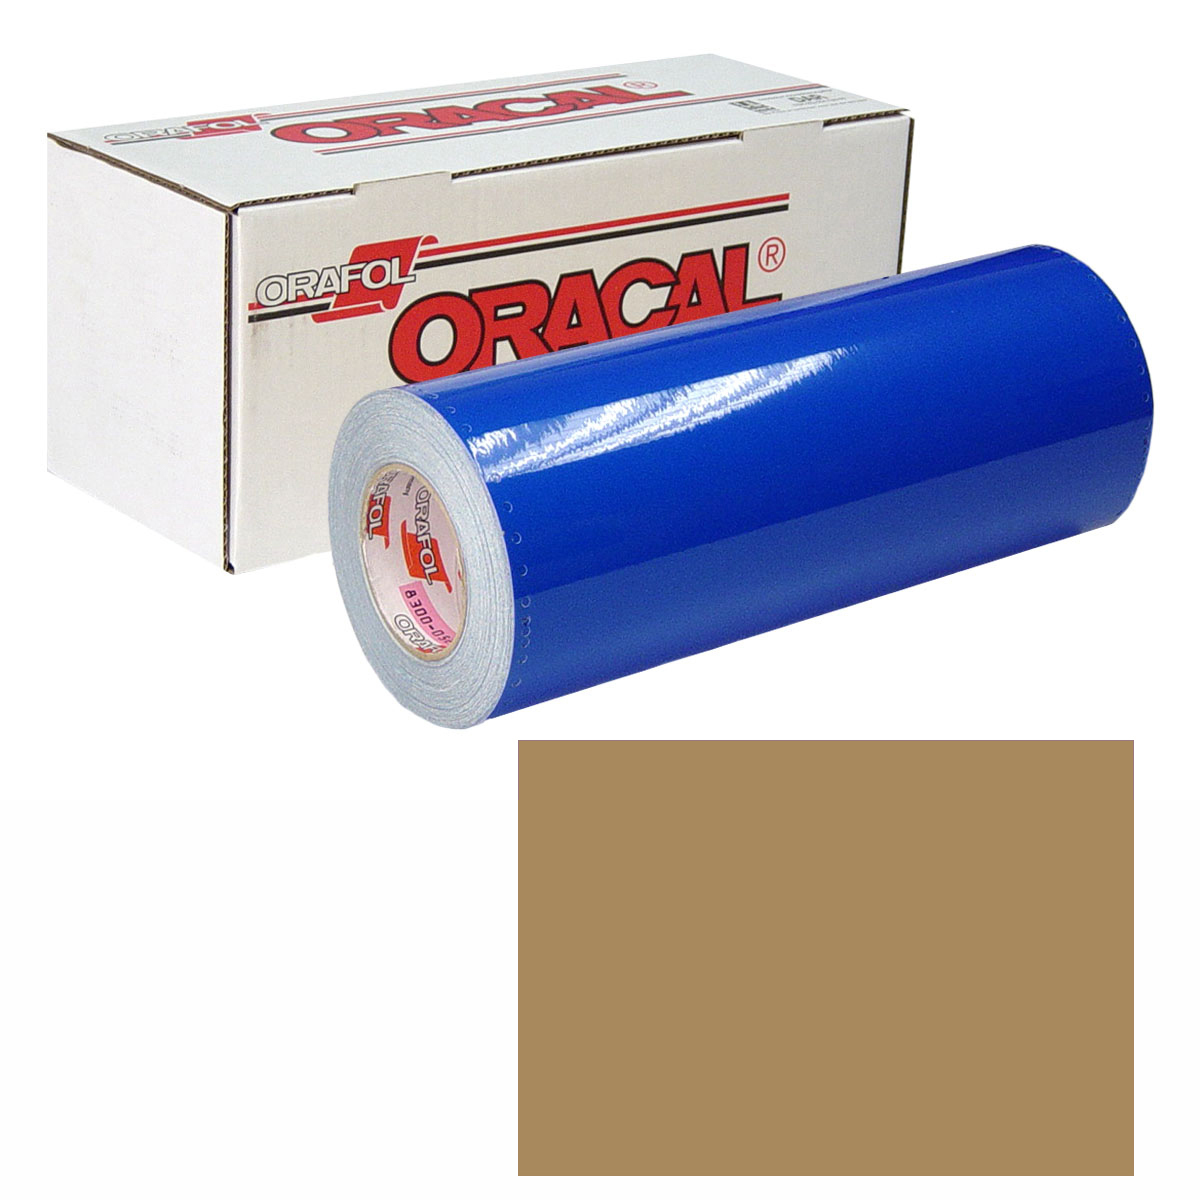 ORACAL 631 30in X 50yd 081 Light Brown